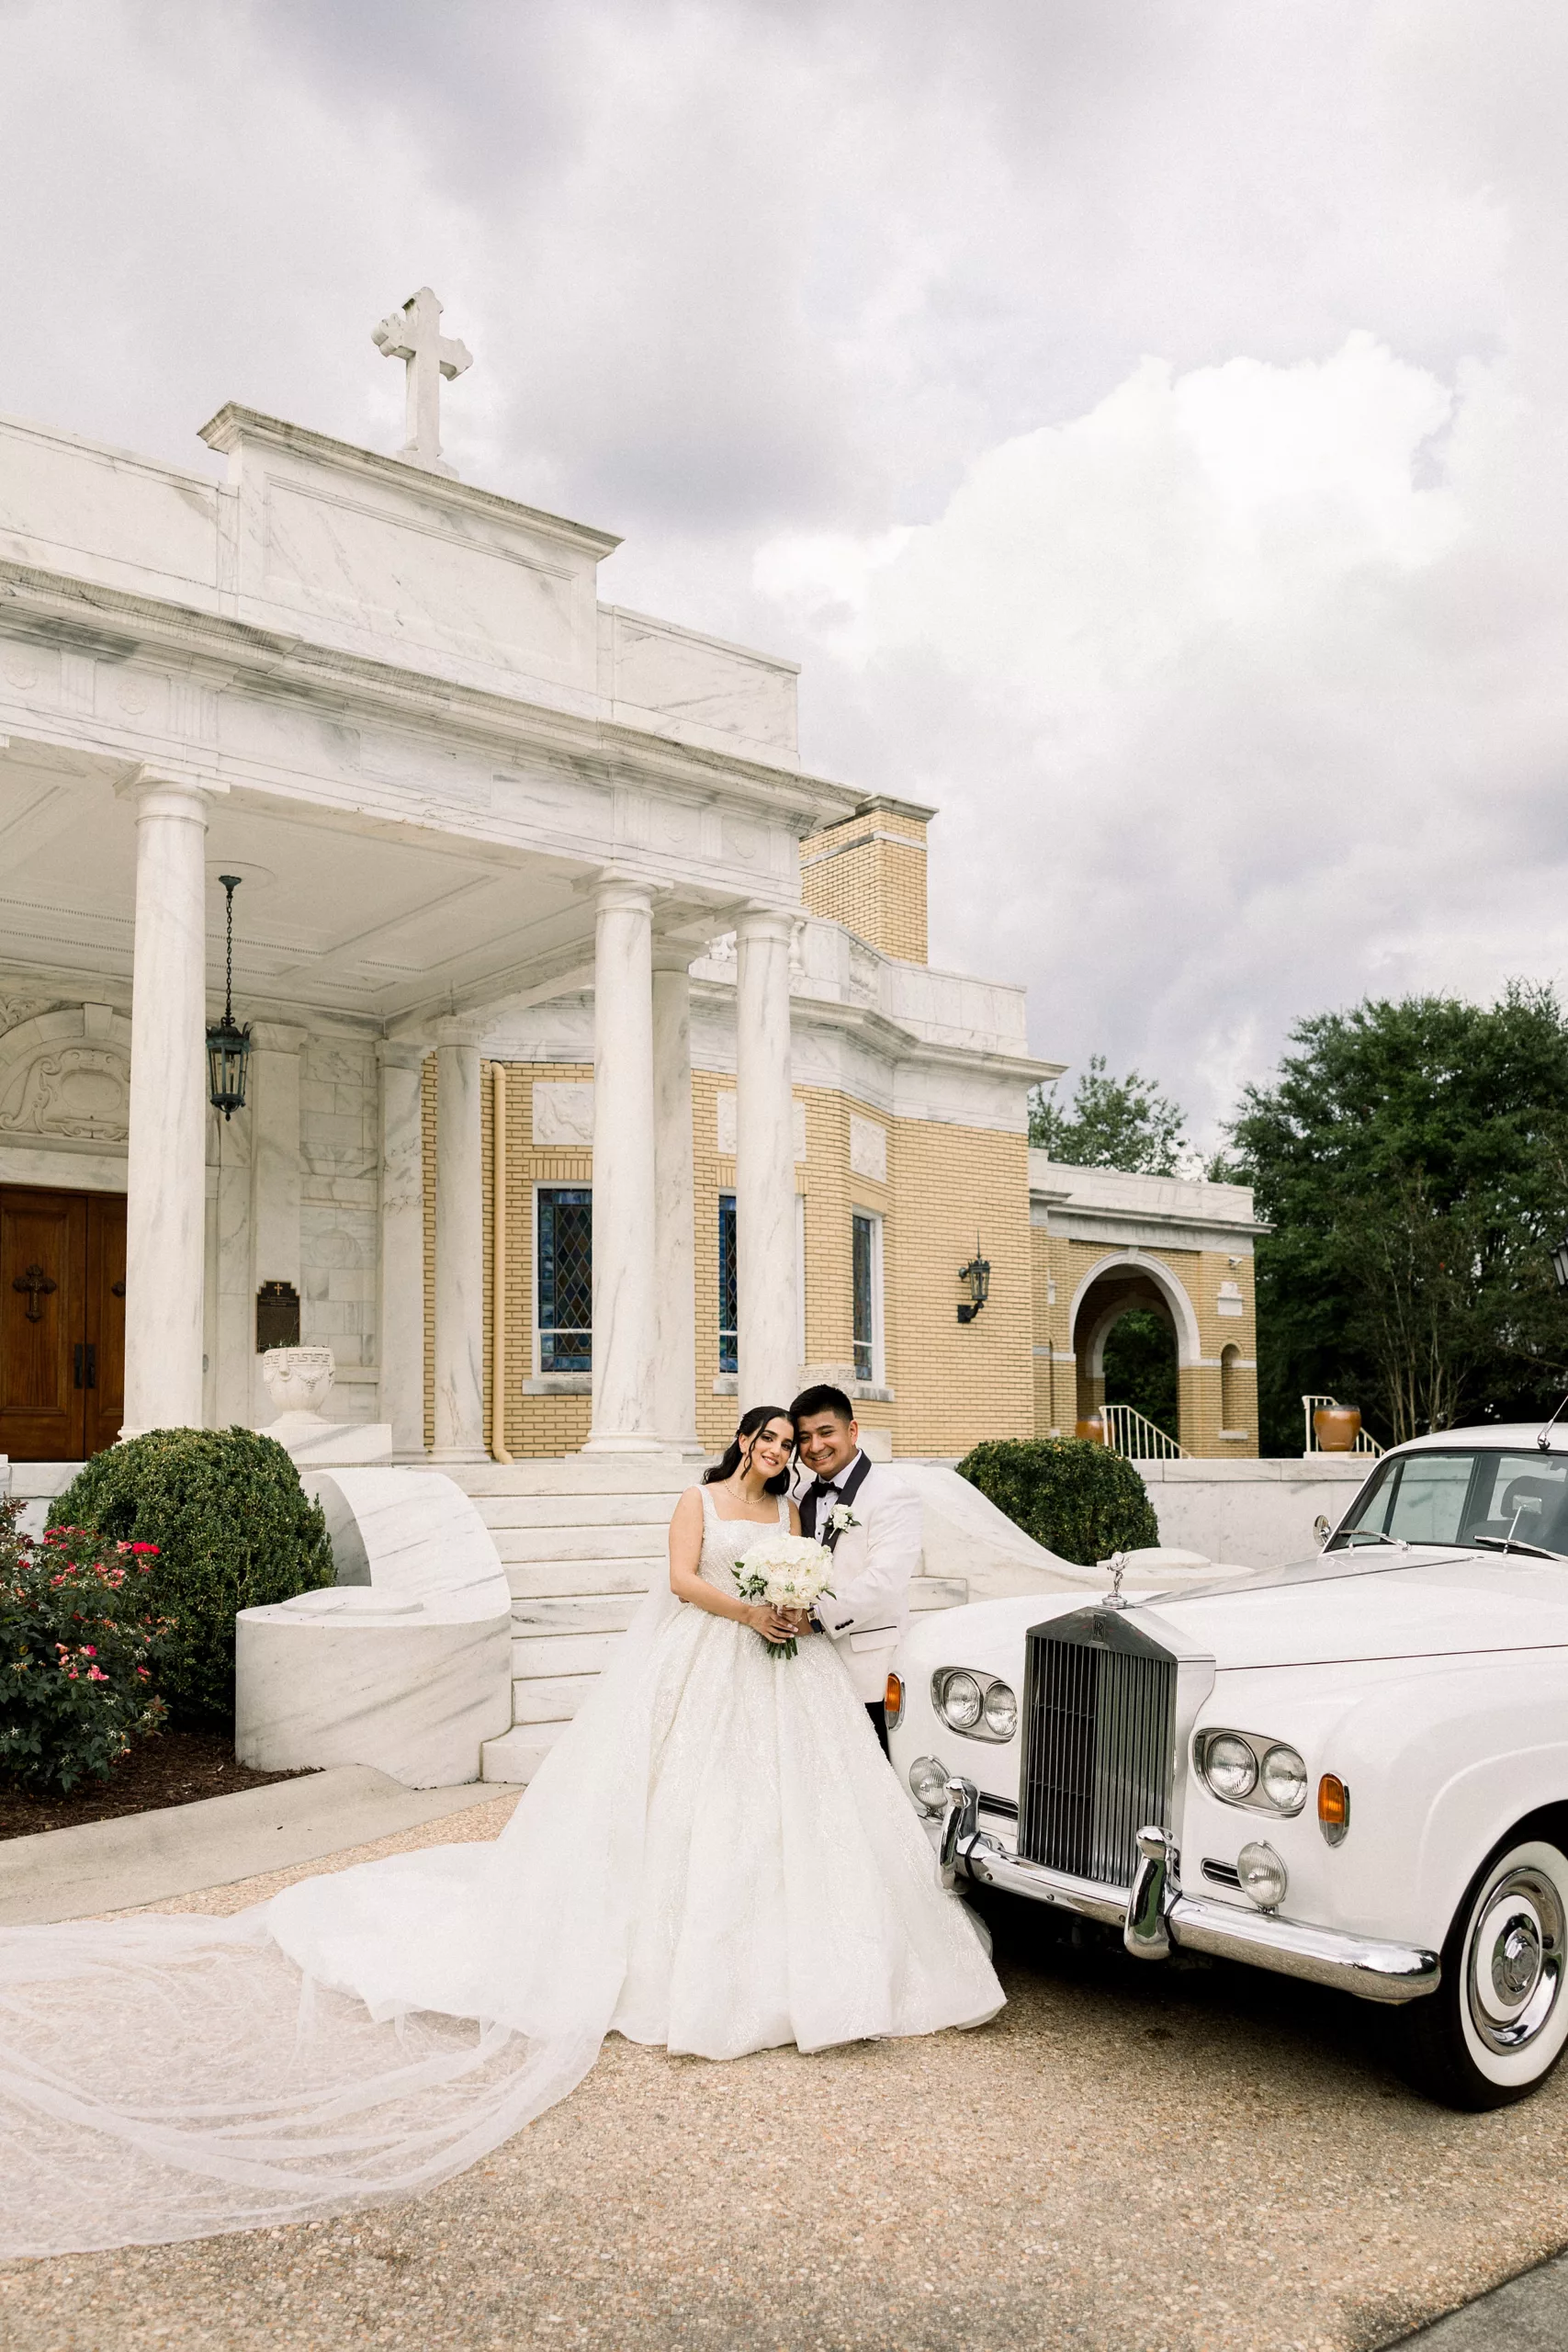 Newlyweds lean against an antique limo in front of the Biltmore Ballrooms Wedding venue